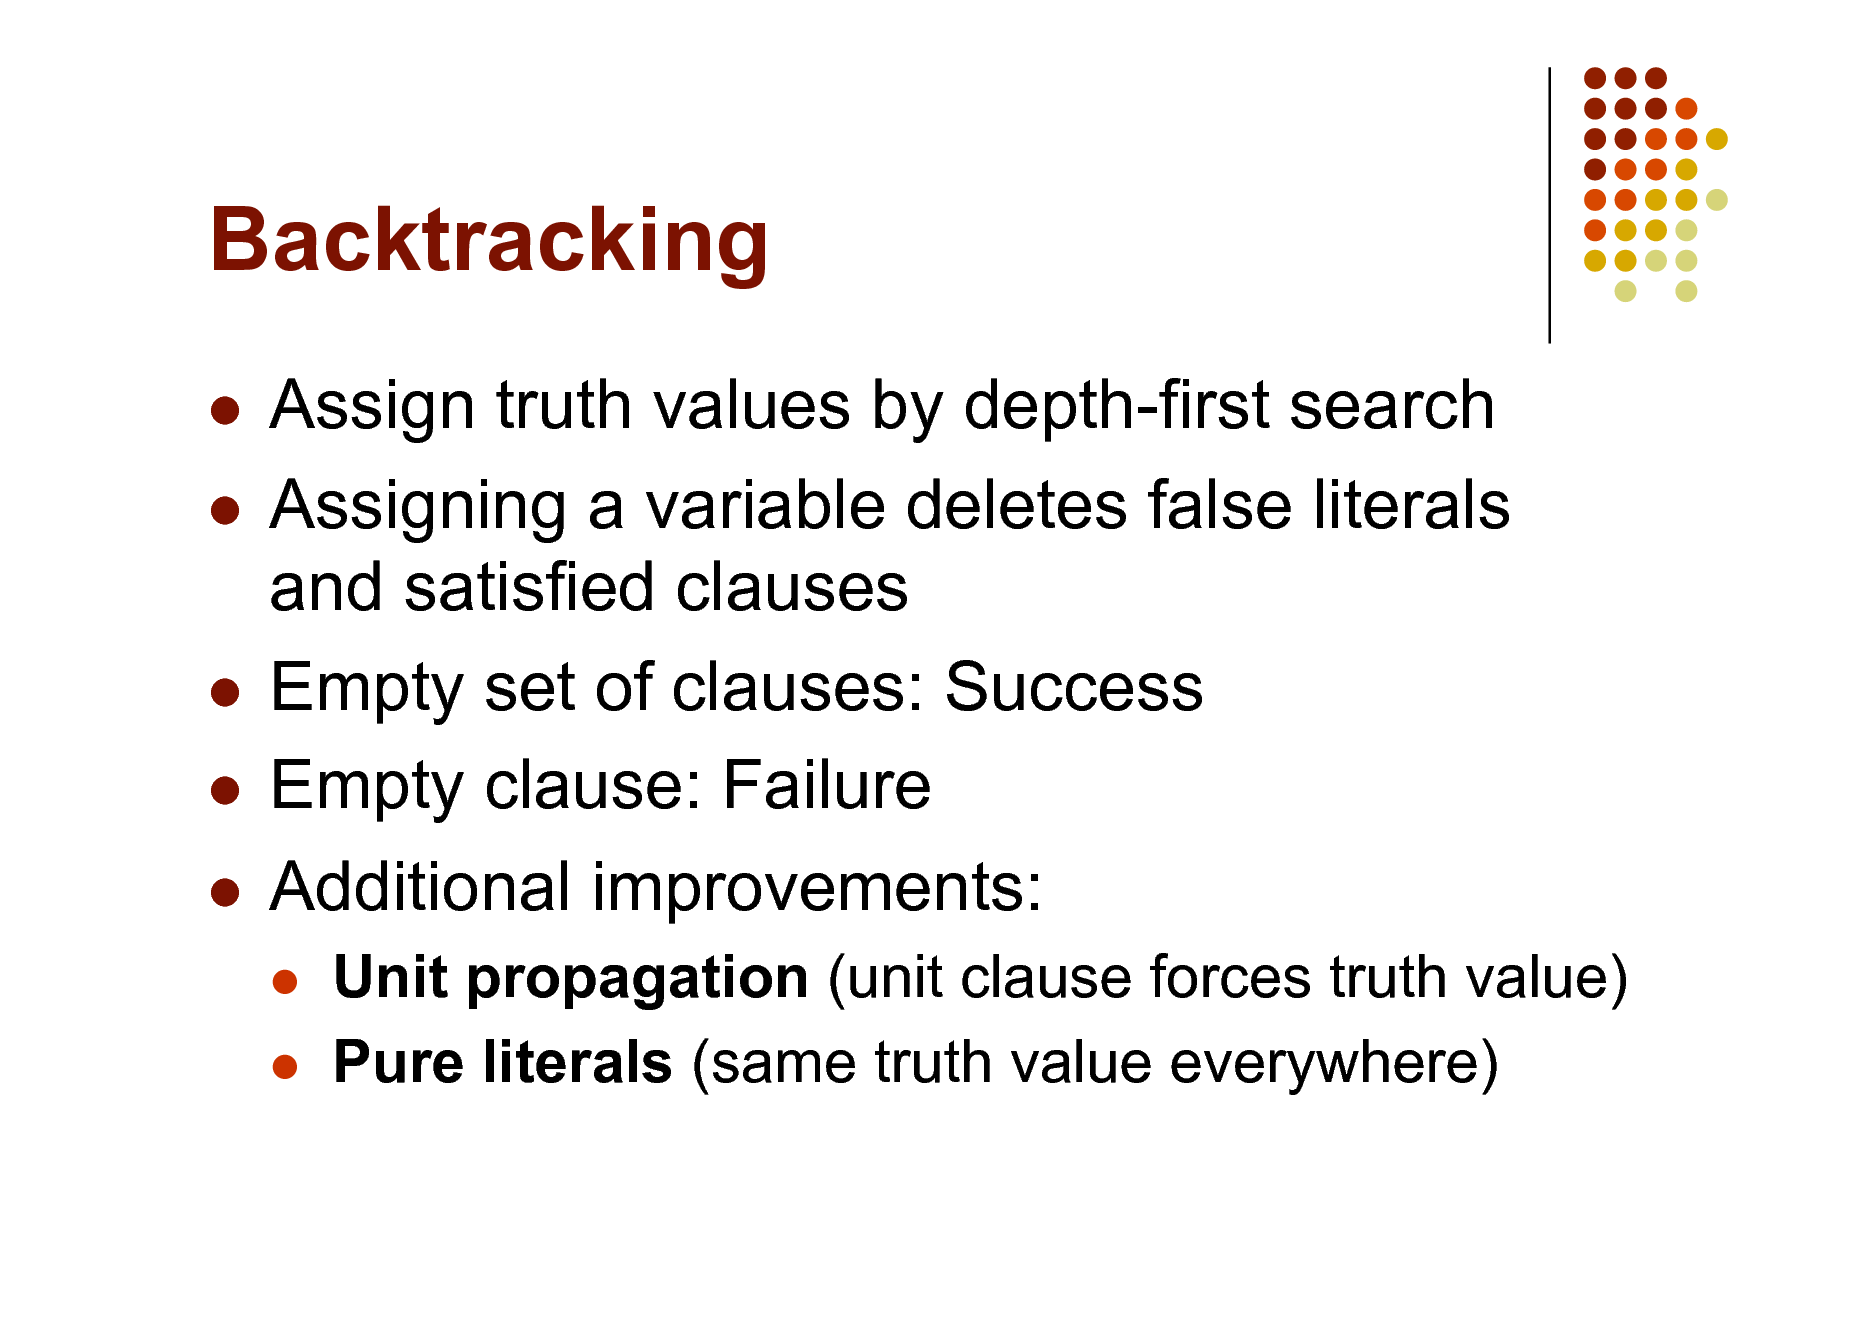 Slide: Backtracking
Assign truth values by depth-first search  Assigning a variable deletes false literals and satisfied clauses  Empty set of clauses: Success  Empty clause: Failure  Additional improvements:

 

Unit propagation (unit clause forces truth value) Pure literals (same truth value everywhere)

